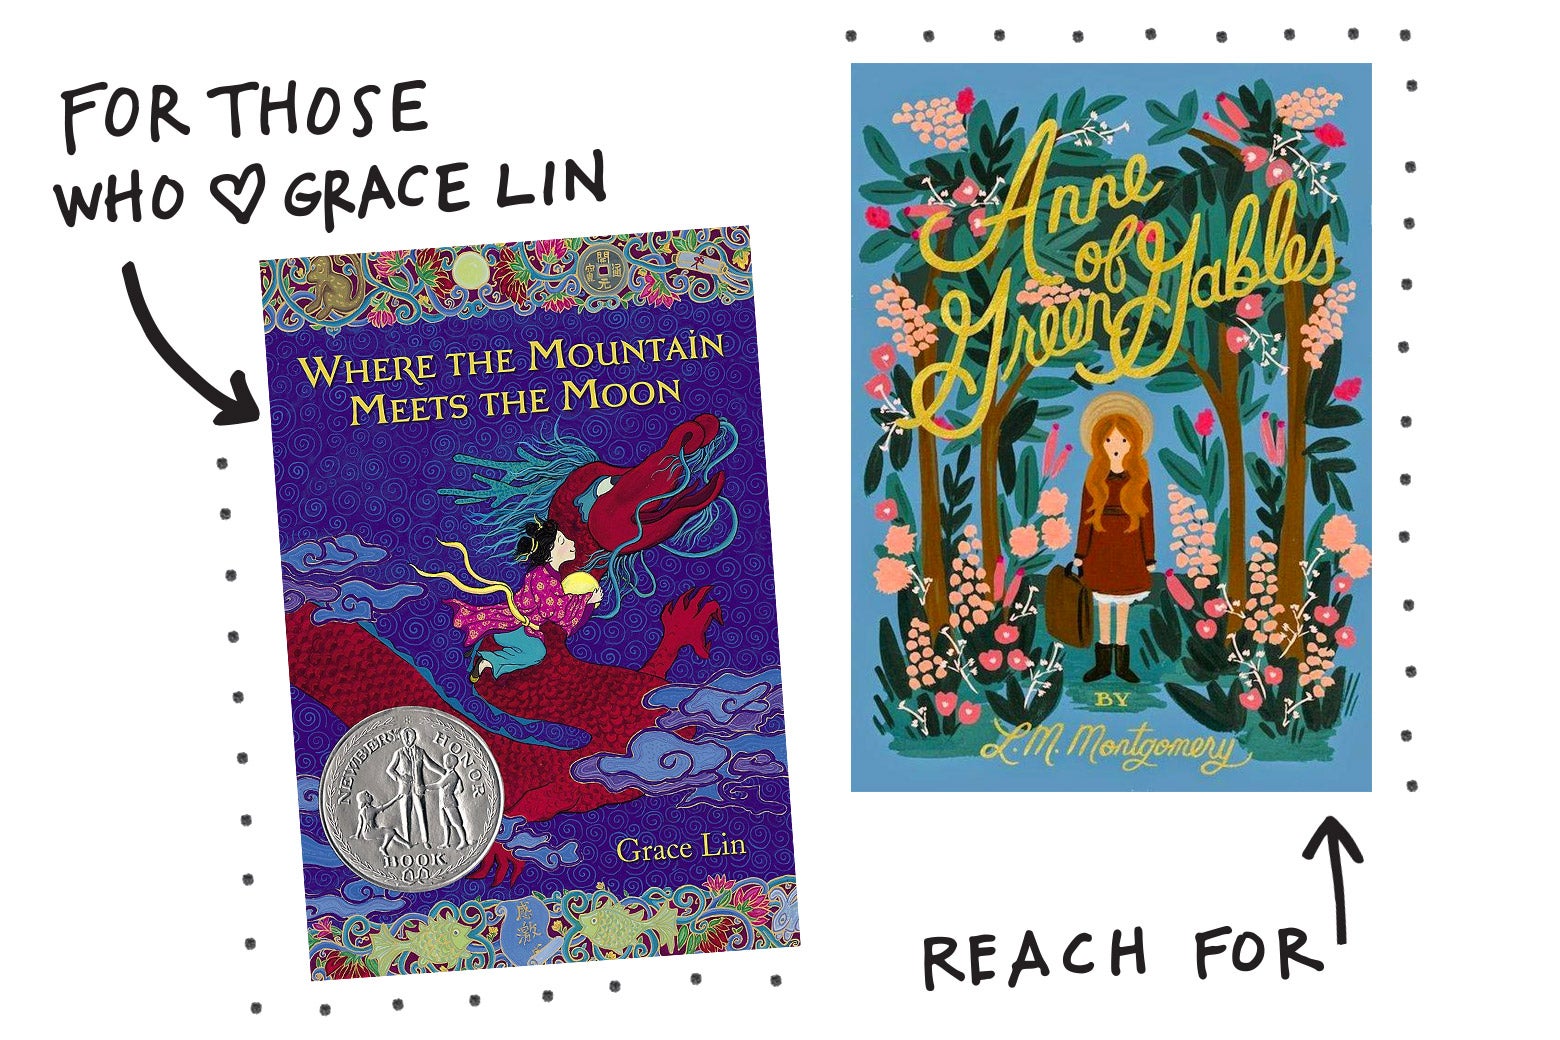 For those who love Grace Lin, reach for Anne of Green Gables.